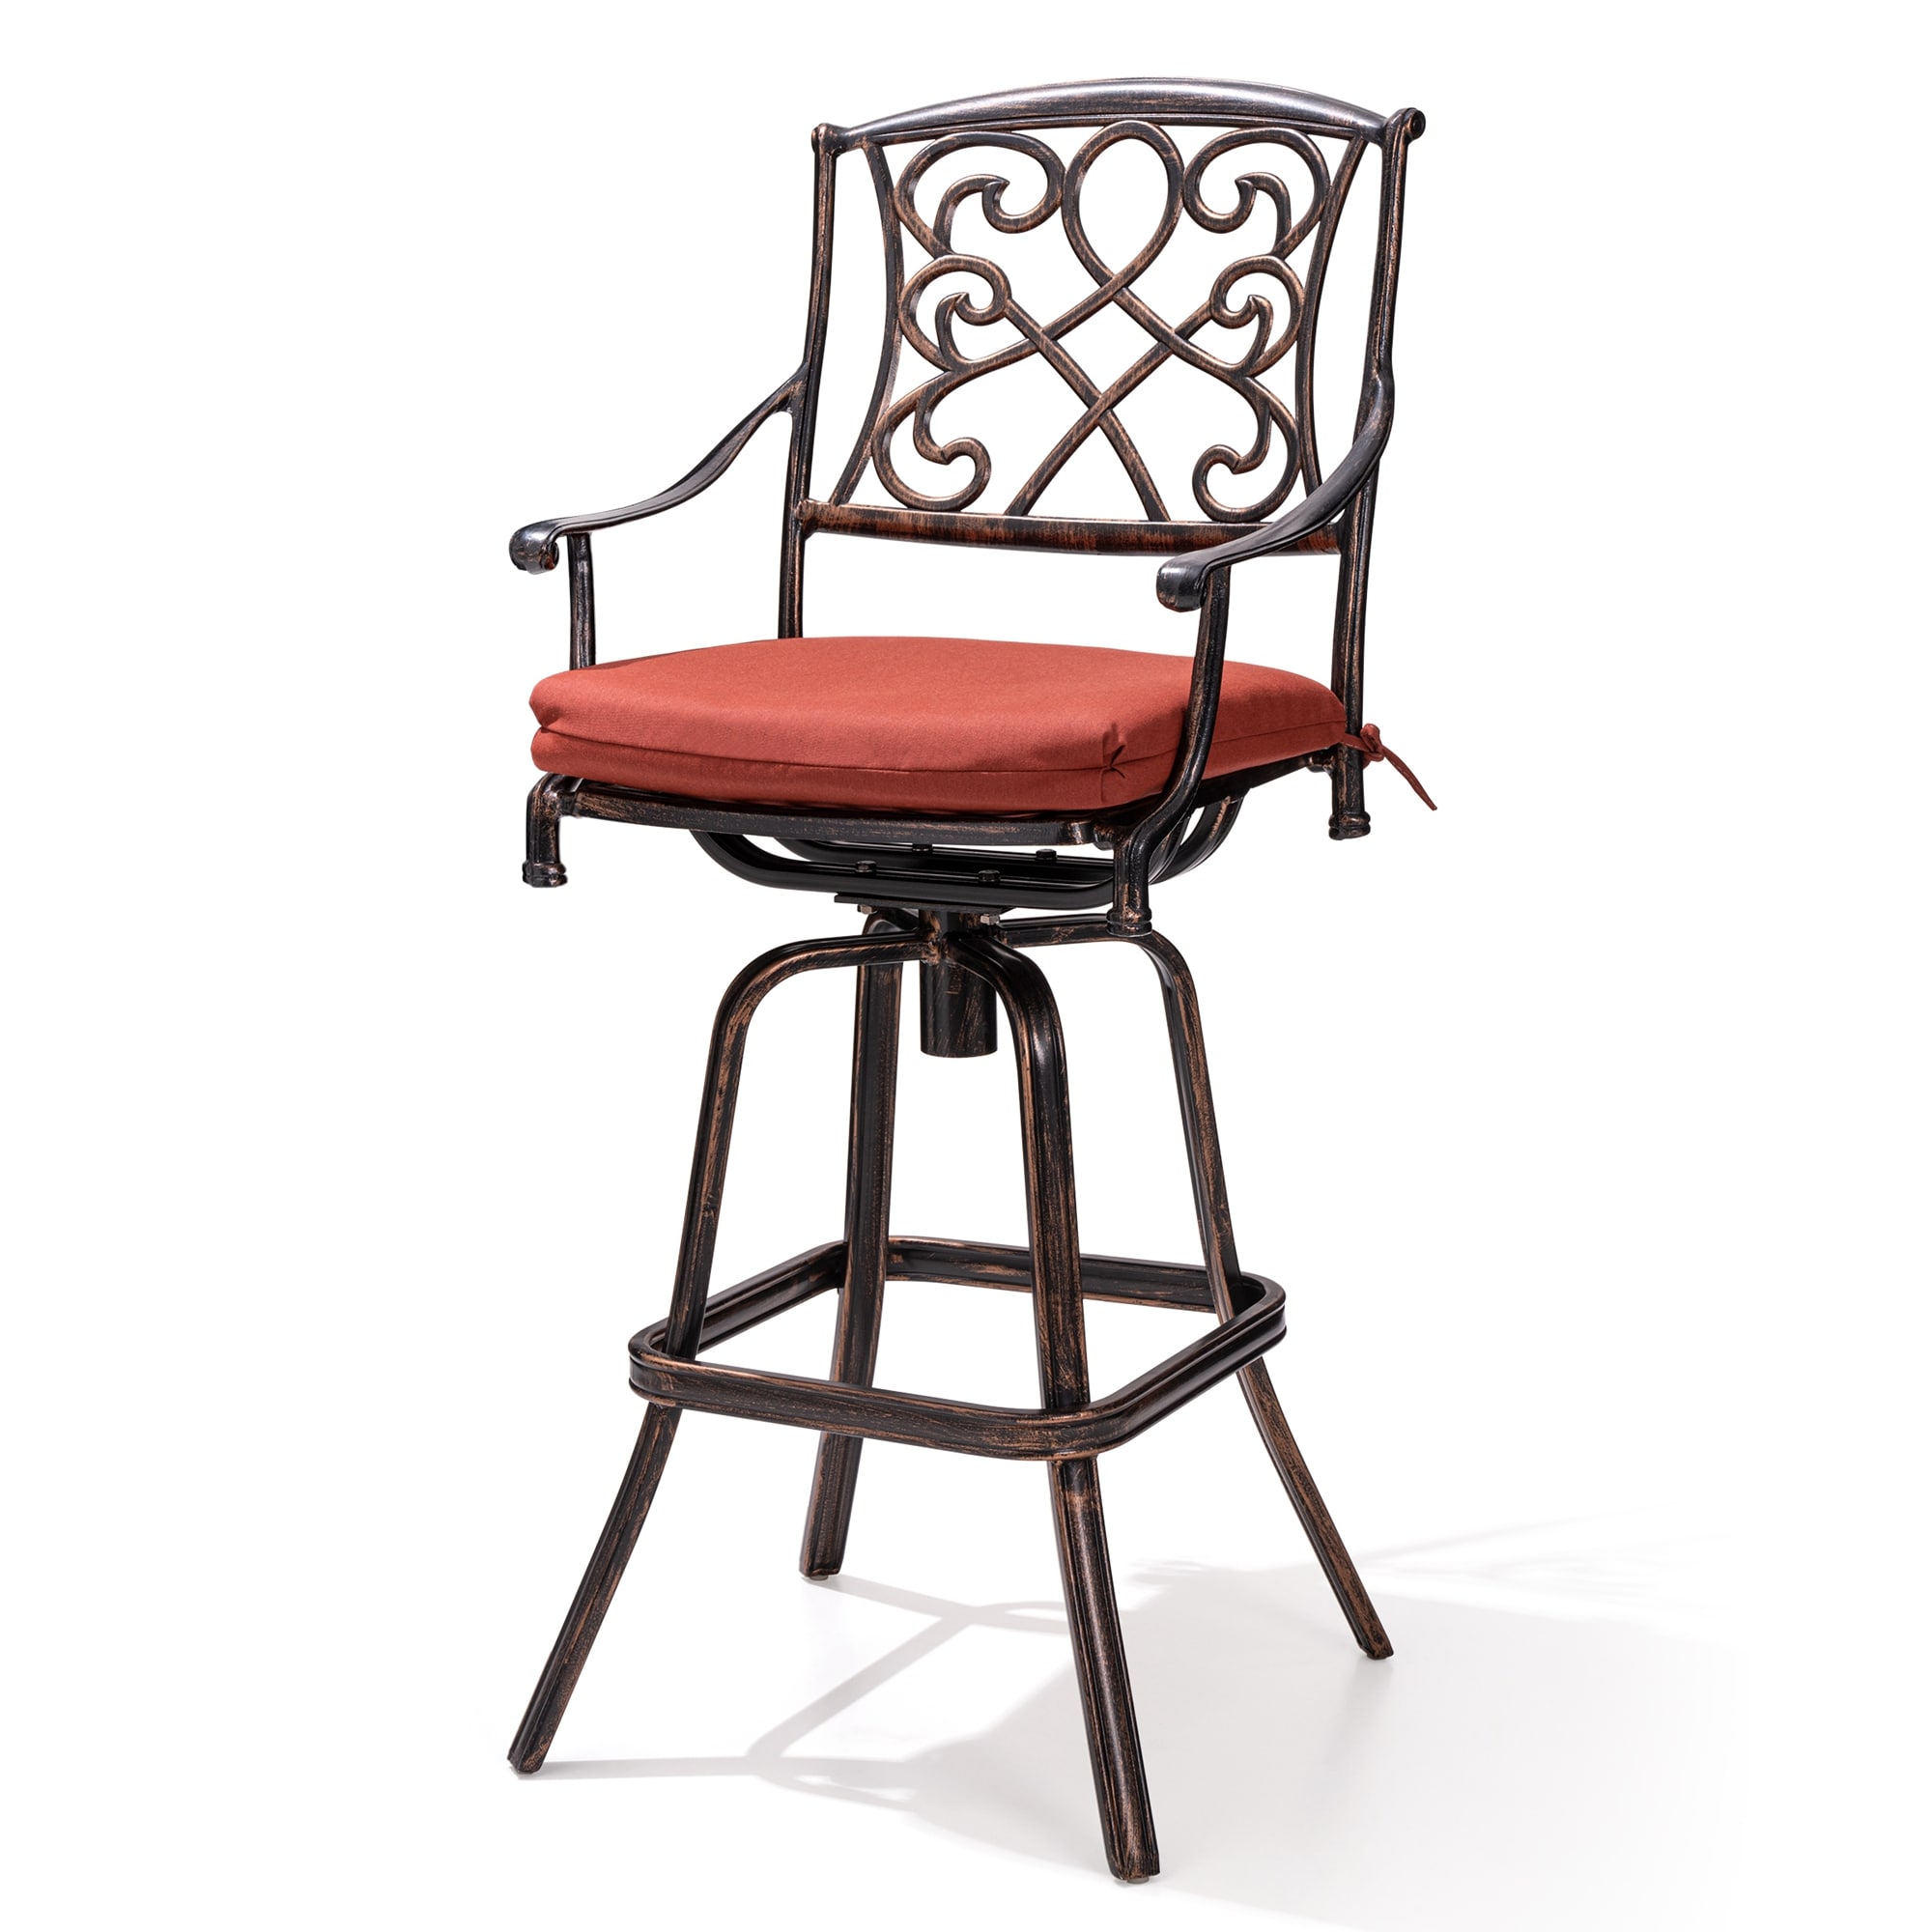 Crestlive Products Patio bar stool Aluminum Frame In Antique Brown Finish Aluminum Frame Swivel Bar Stool Chair(s) with Red Sunbrella Fabric Cushion -  CL-ST003RED